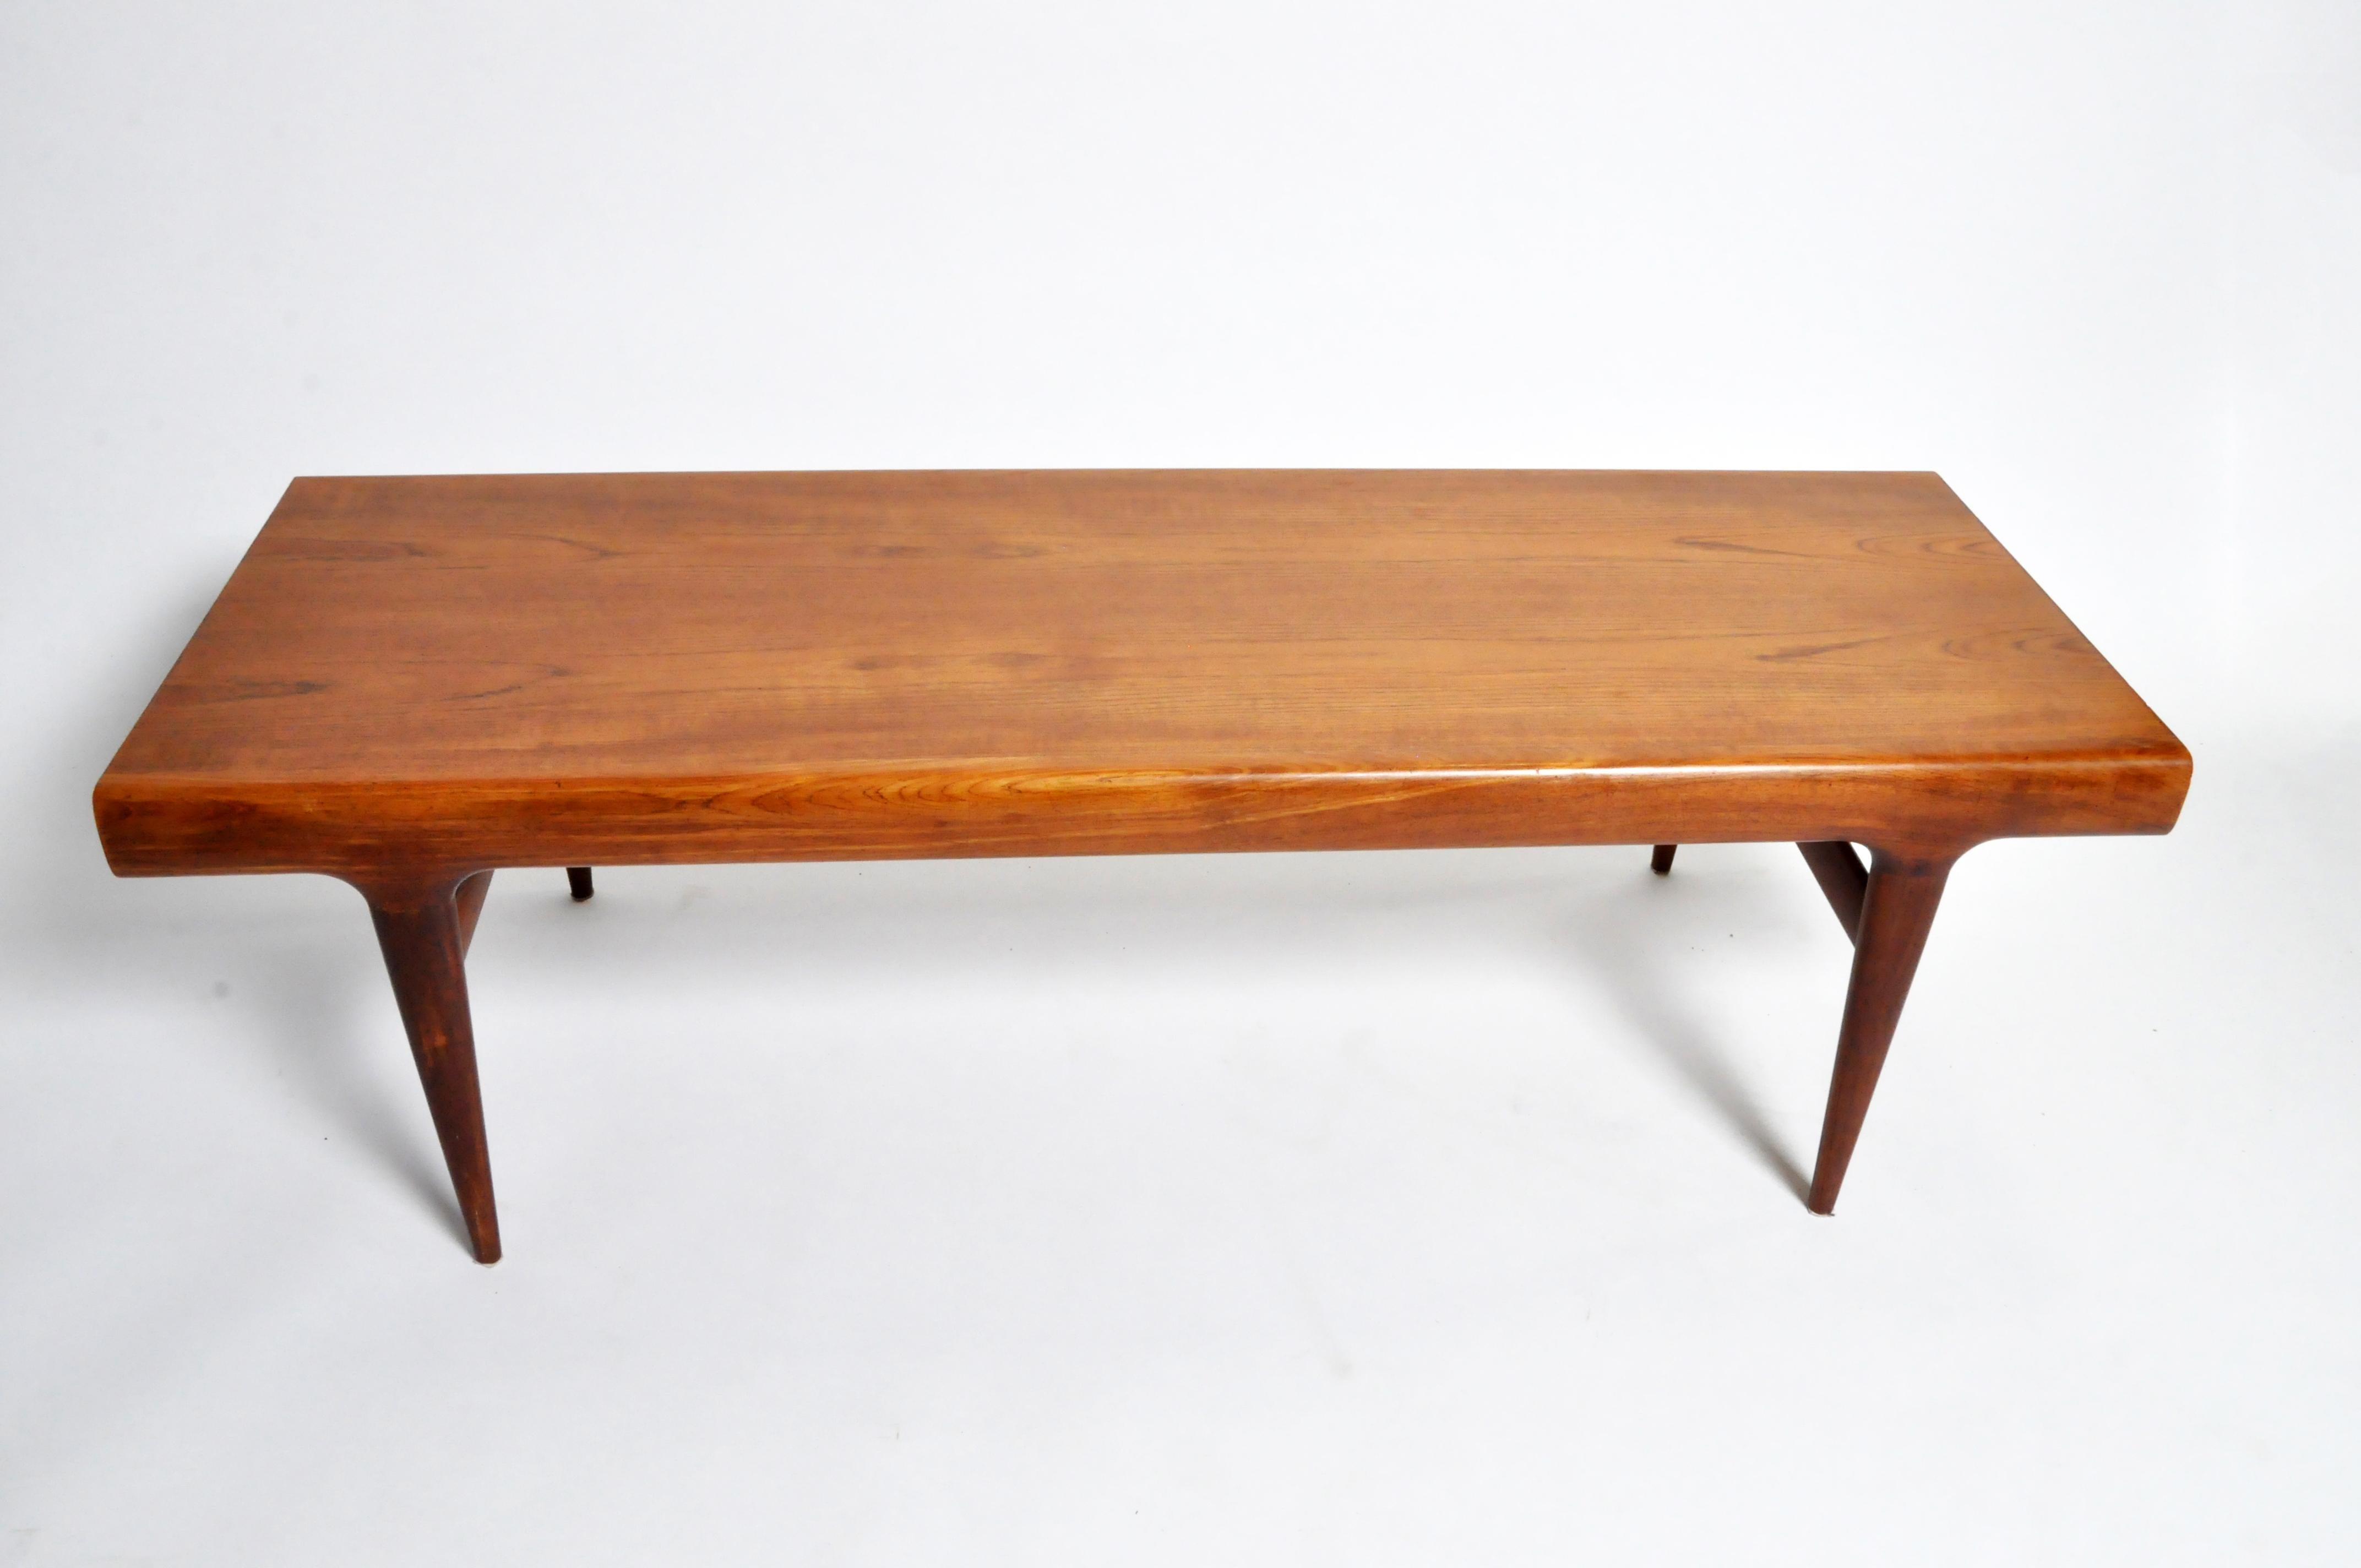 This sleek and very simple Danish, modern, table has a solid teak frame and teak veneer top. The solid hardwood legs are elegantly tapered. One end features a drawer and the other end features a pull-out surface extension.